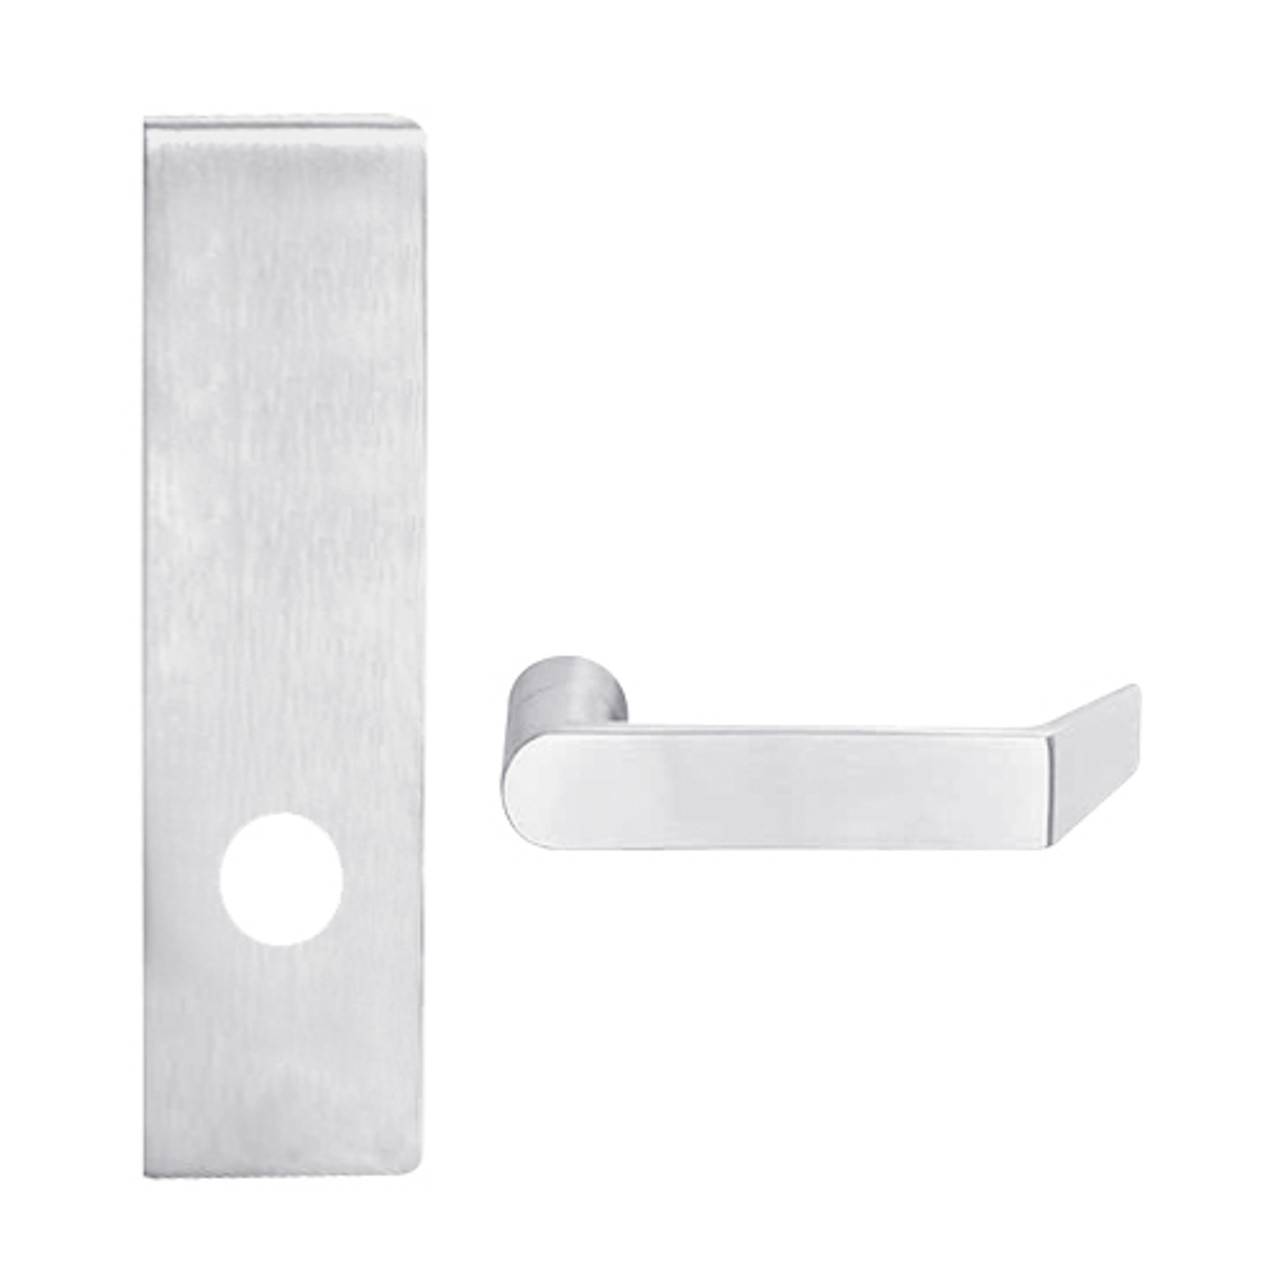 L9010-06N-625 Schlage L Series Passage Latch Commercial Mortise Lock with 06 Cast Lever Design in Bright Chrome